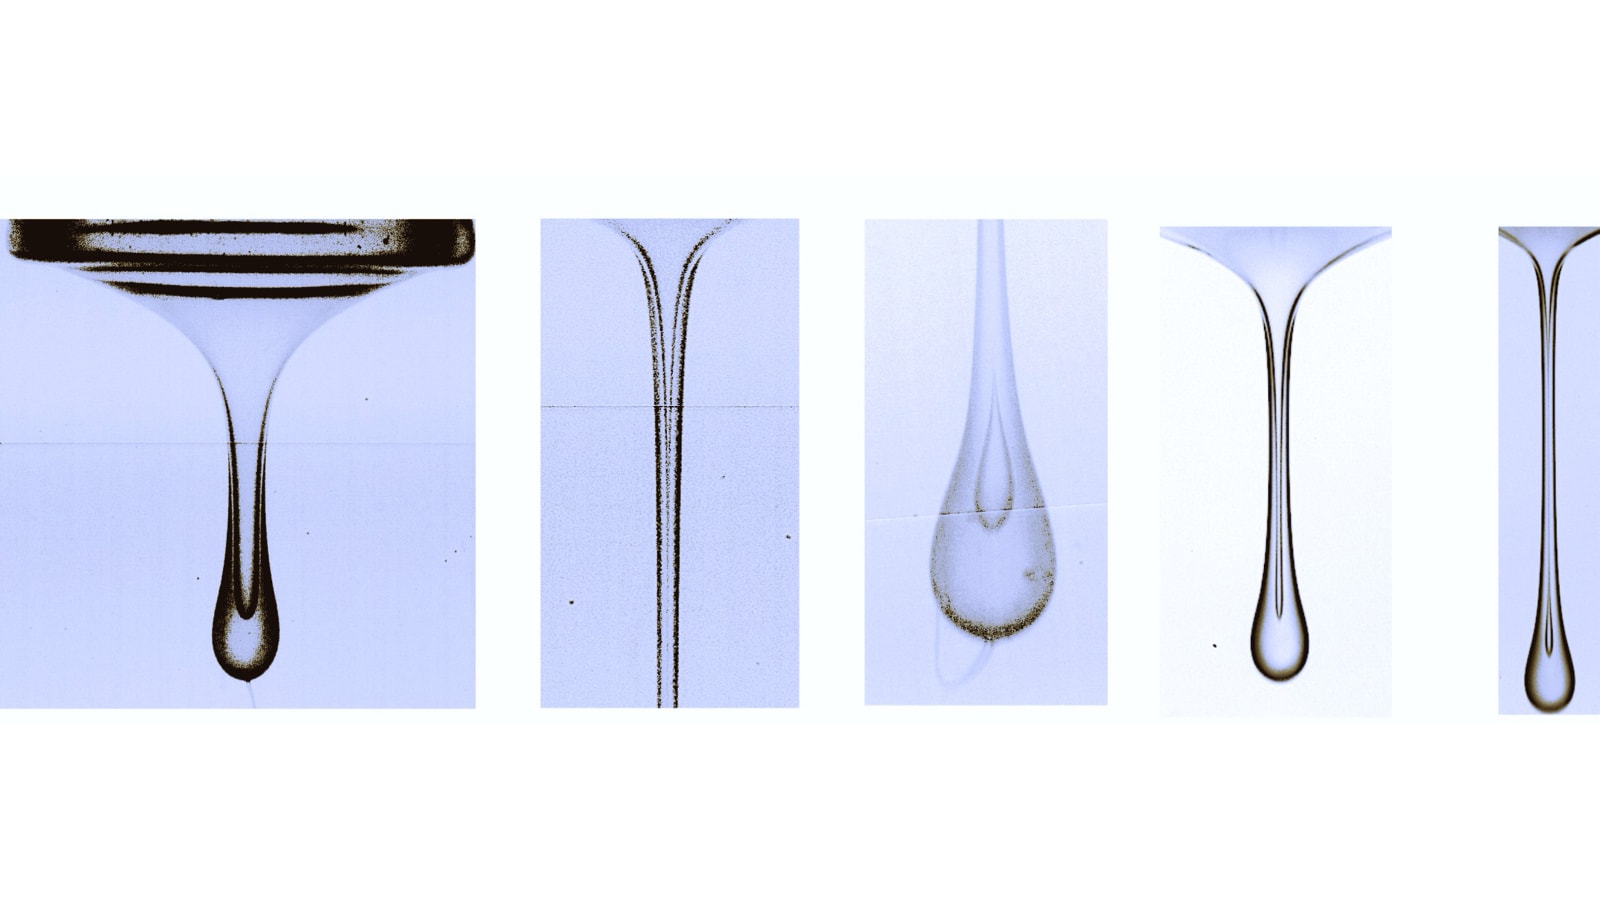 Various stages of drops studied in fluid mechanics. Continuous emission of drops is an often studied problem due to applications from inkjet printing to thin film creation.